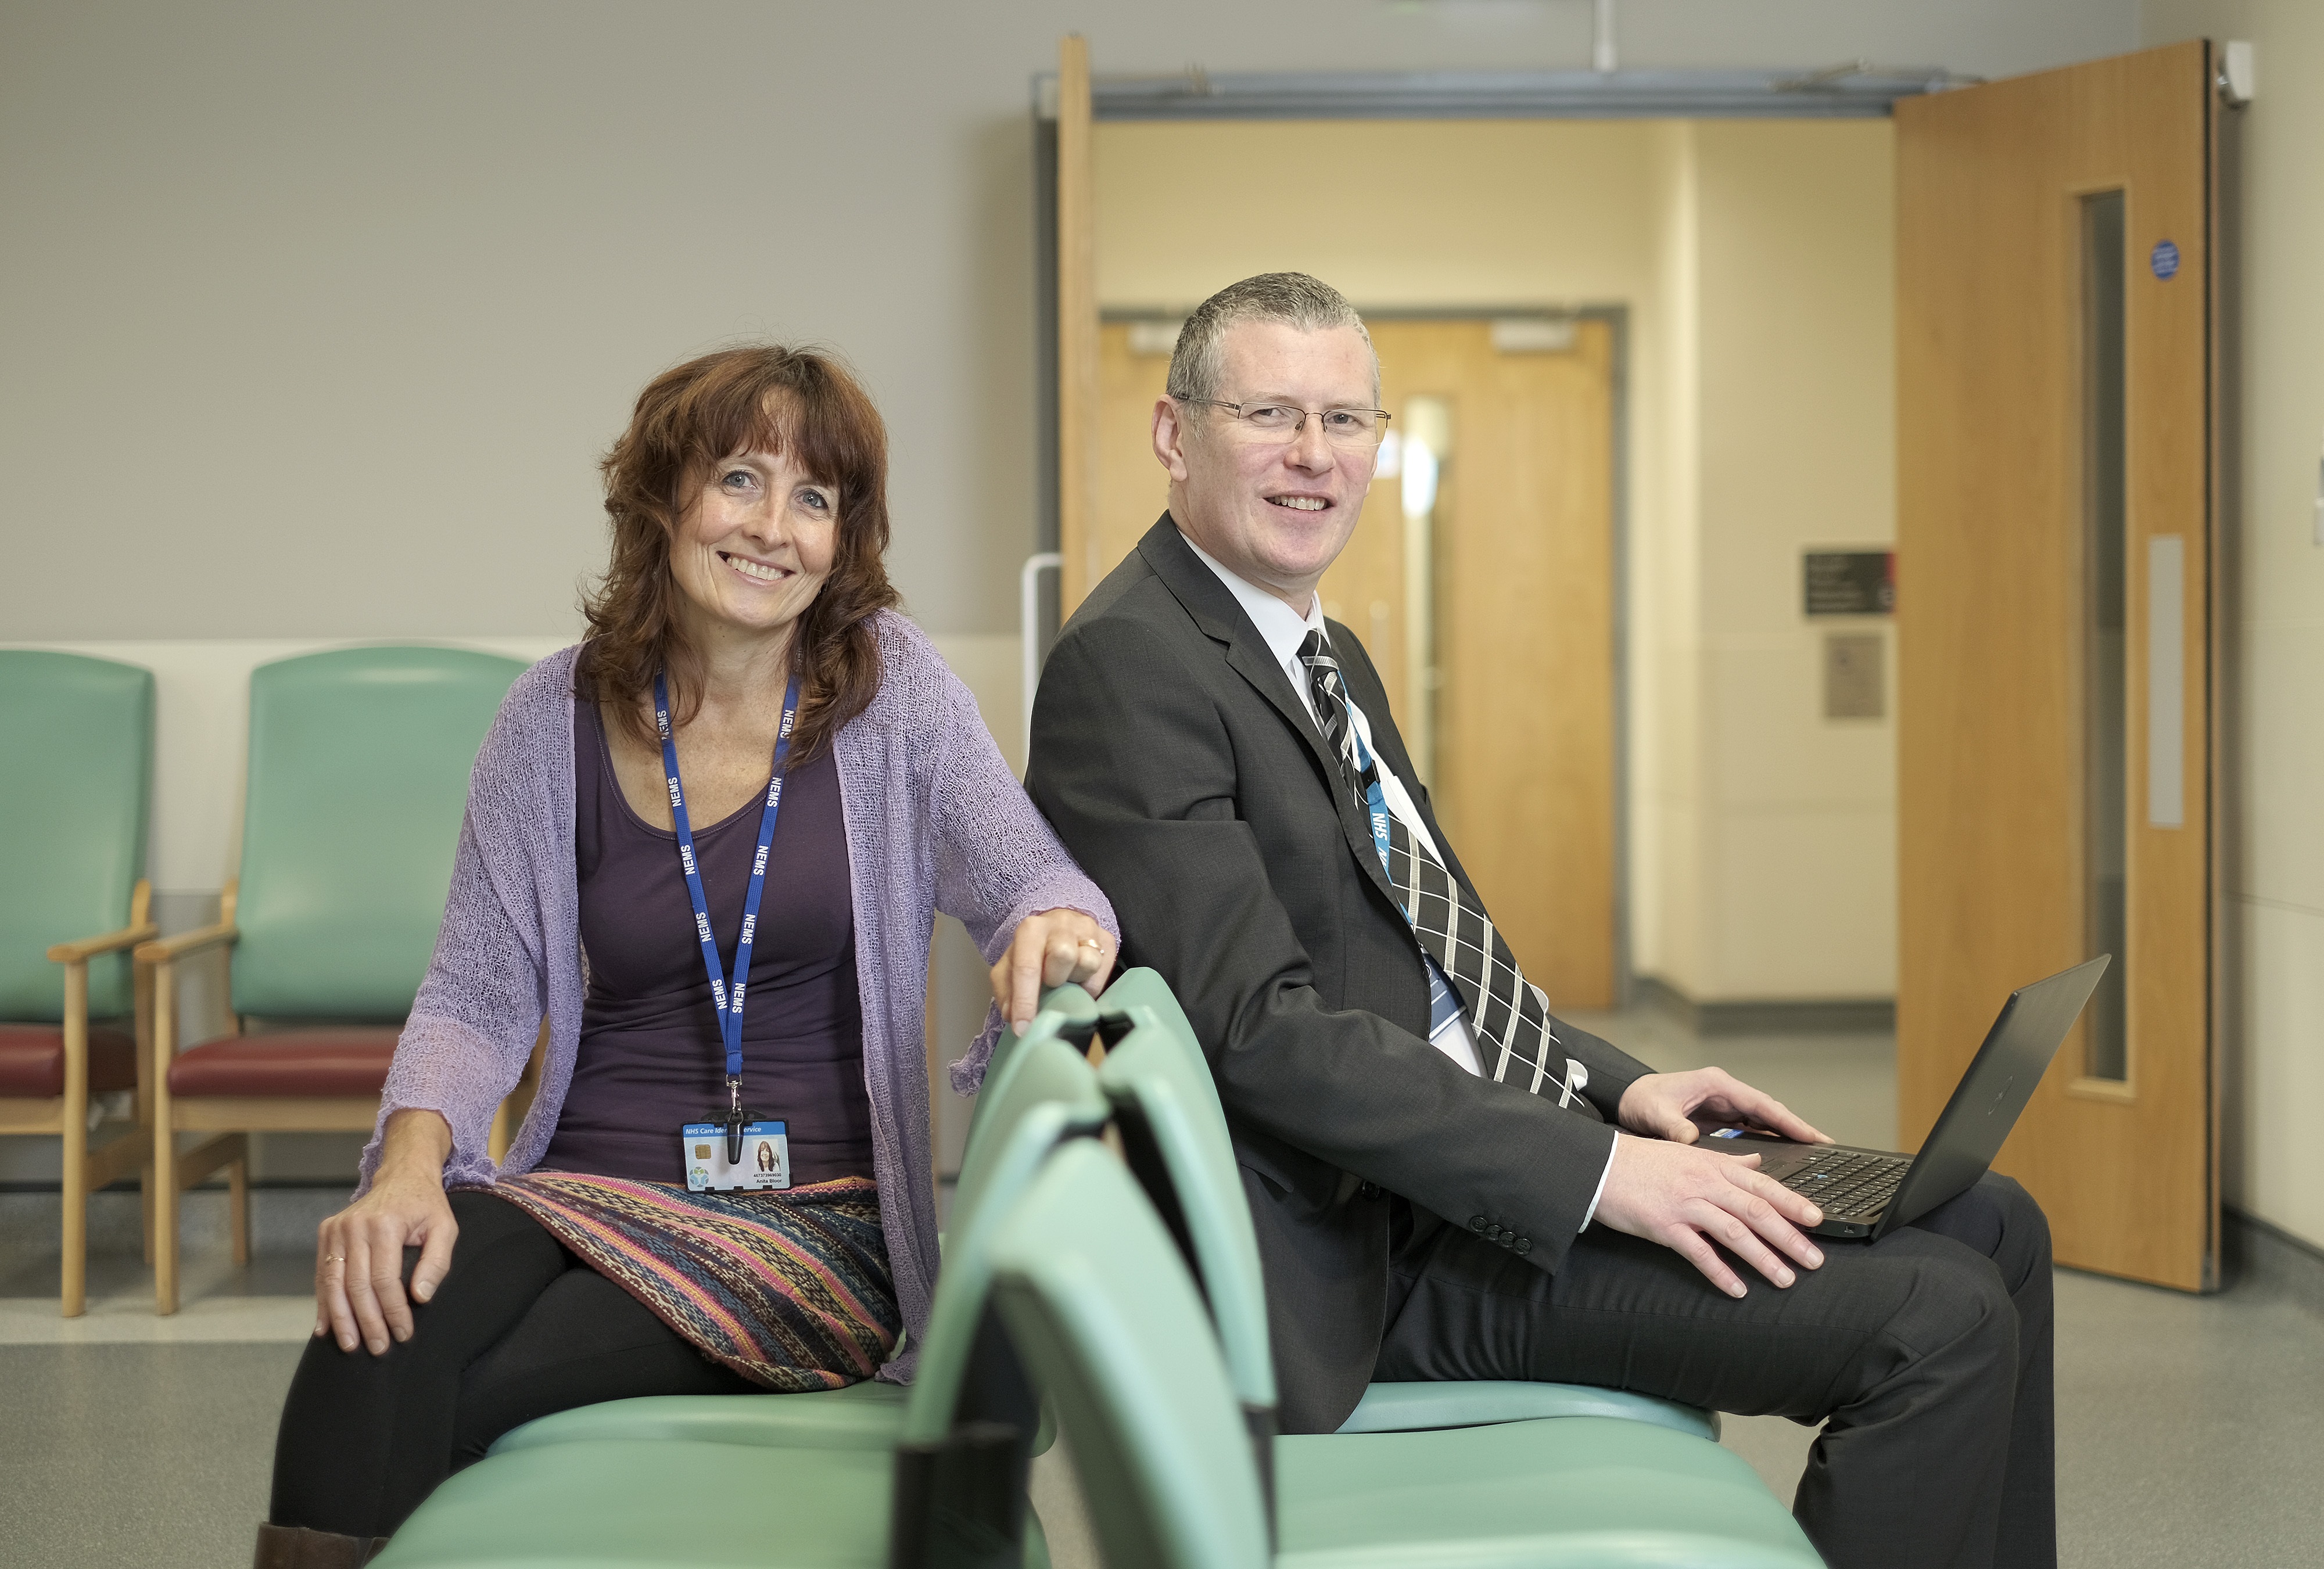 Connected Nottinghamshire offers ‘safer, more efficient’ care with MIG record sharing featured image